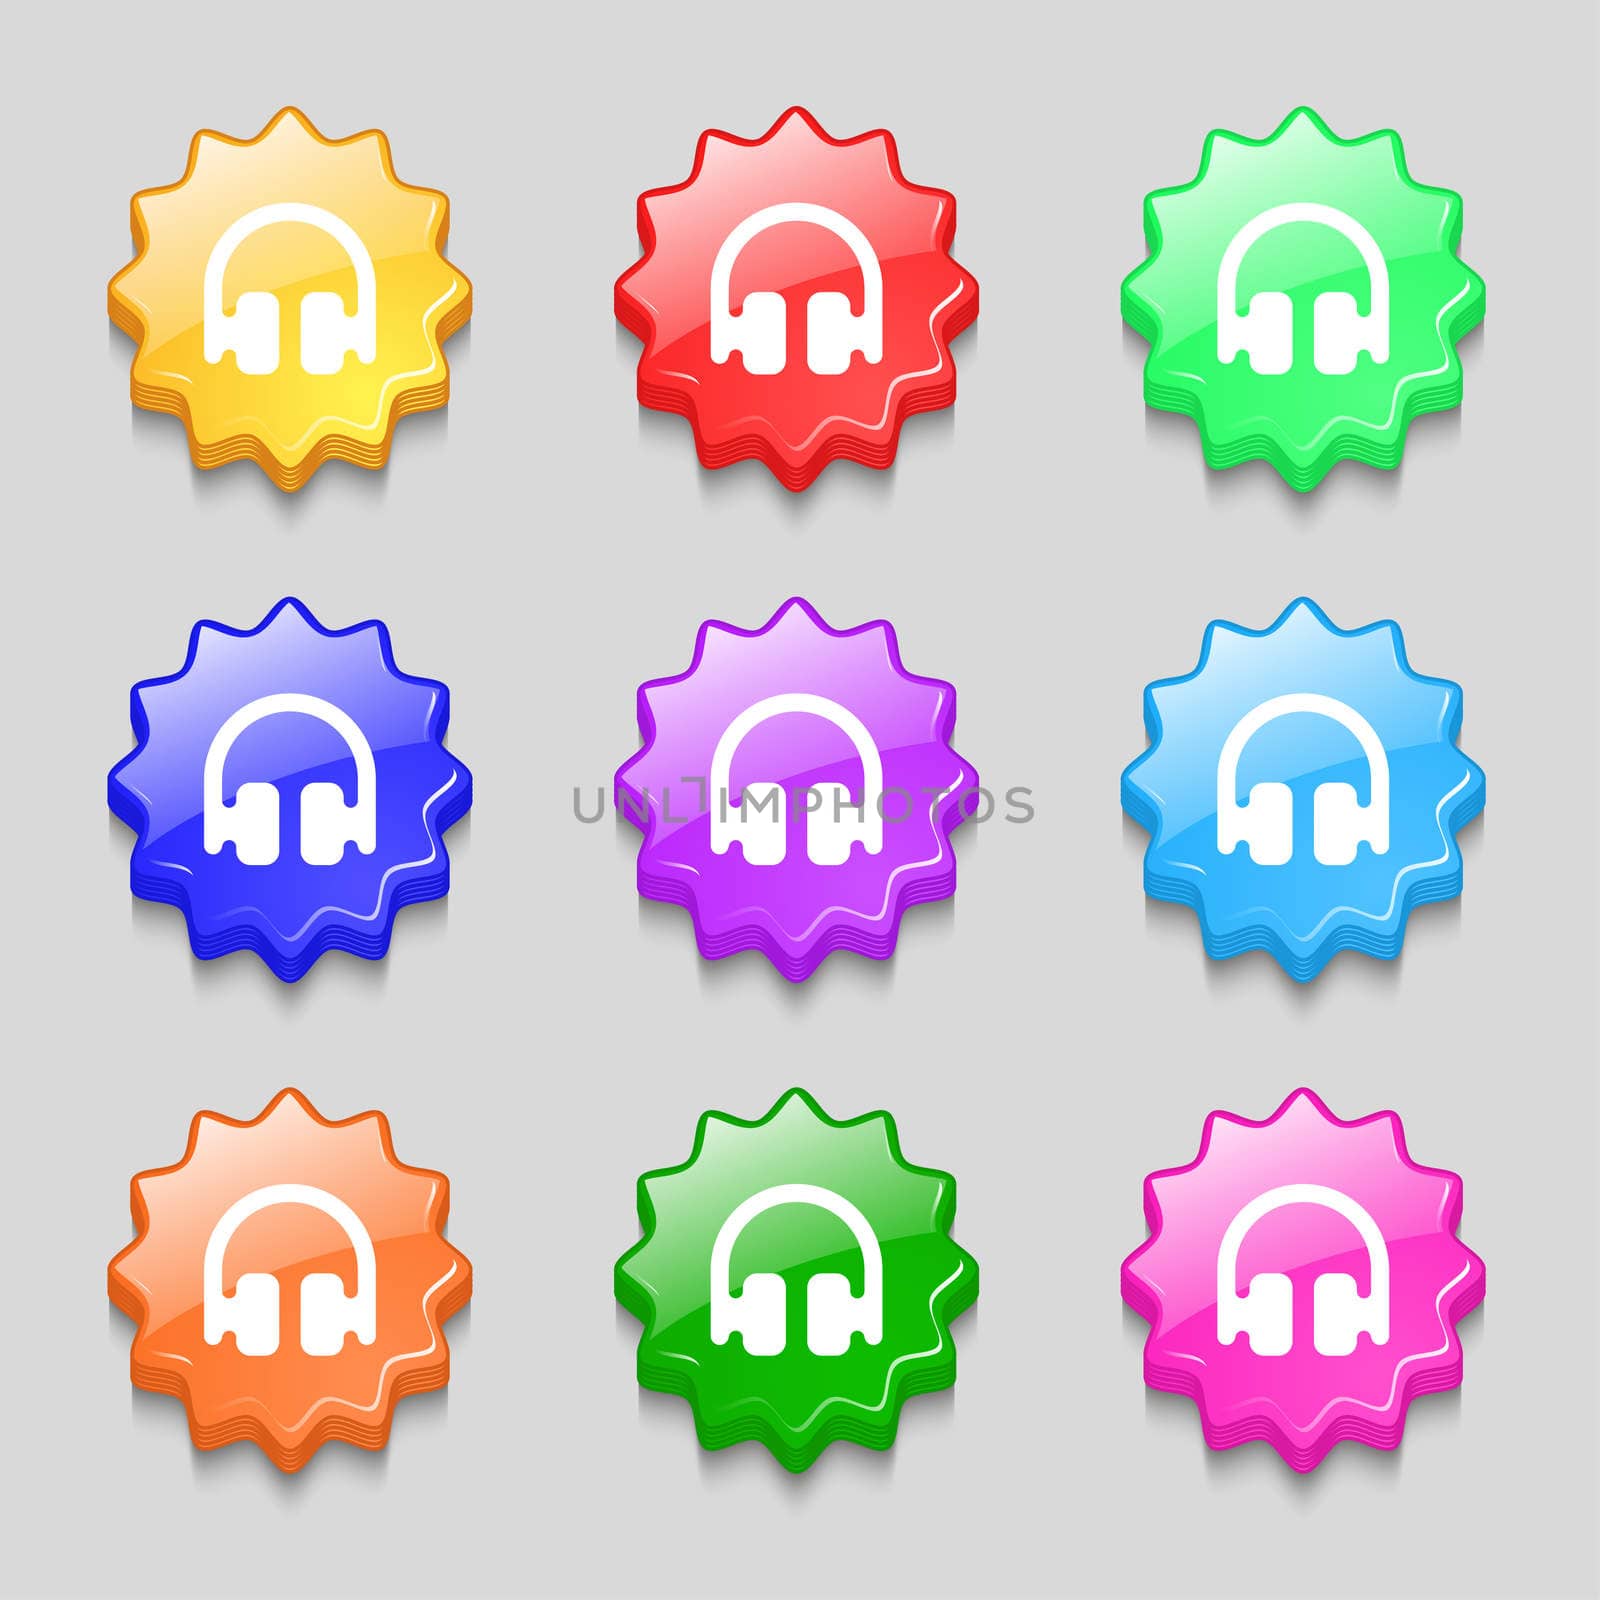 Headphones, Earphones icon sign. symbol on nine wavy colourful buttons. illustration